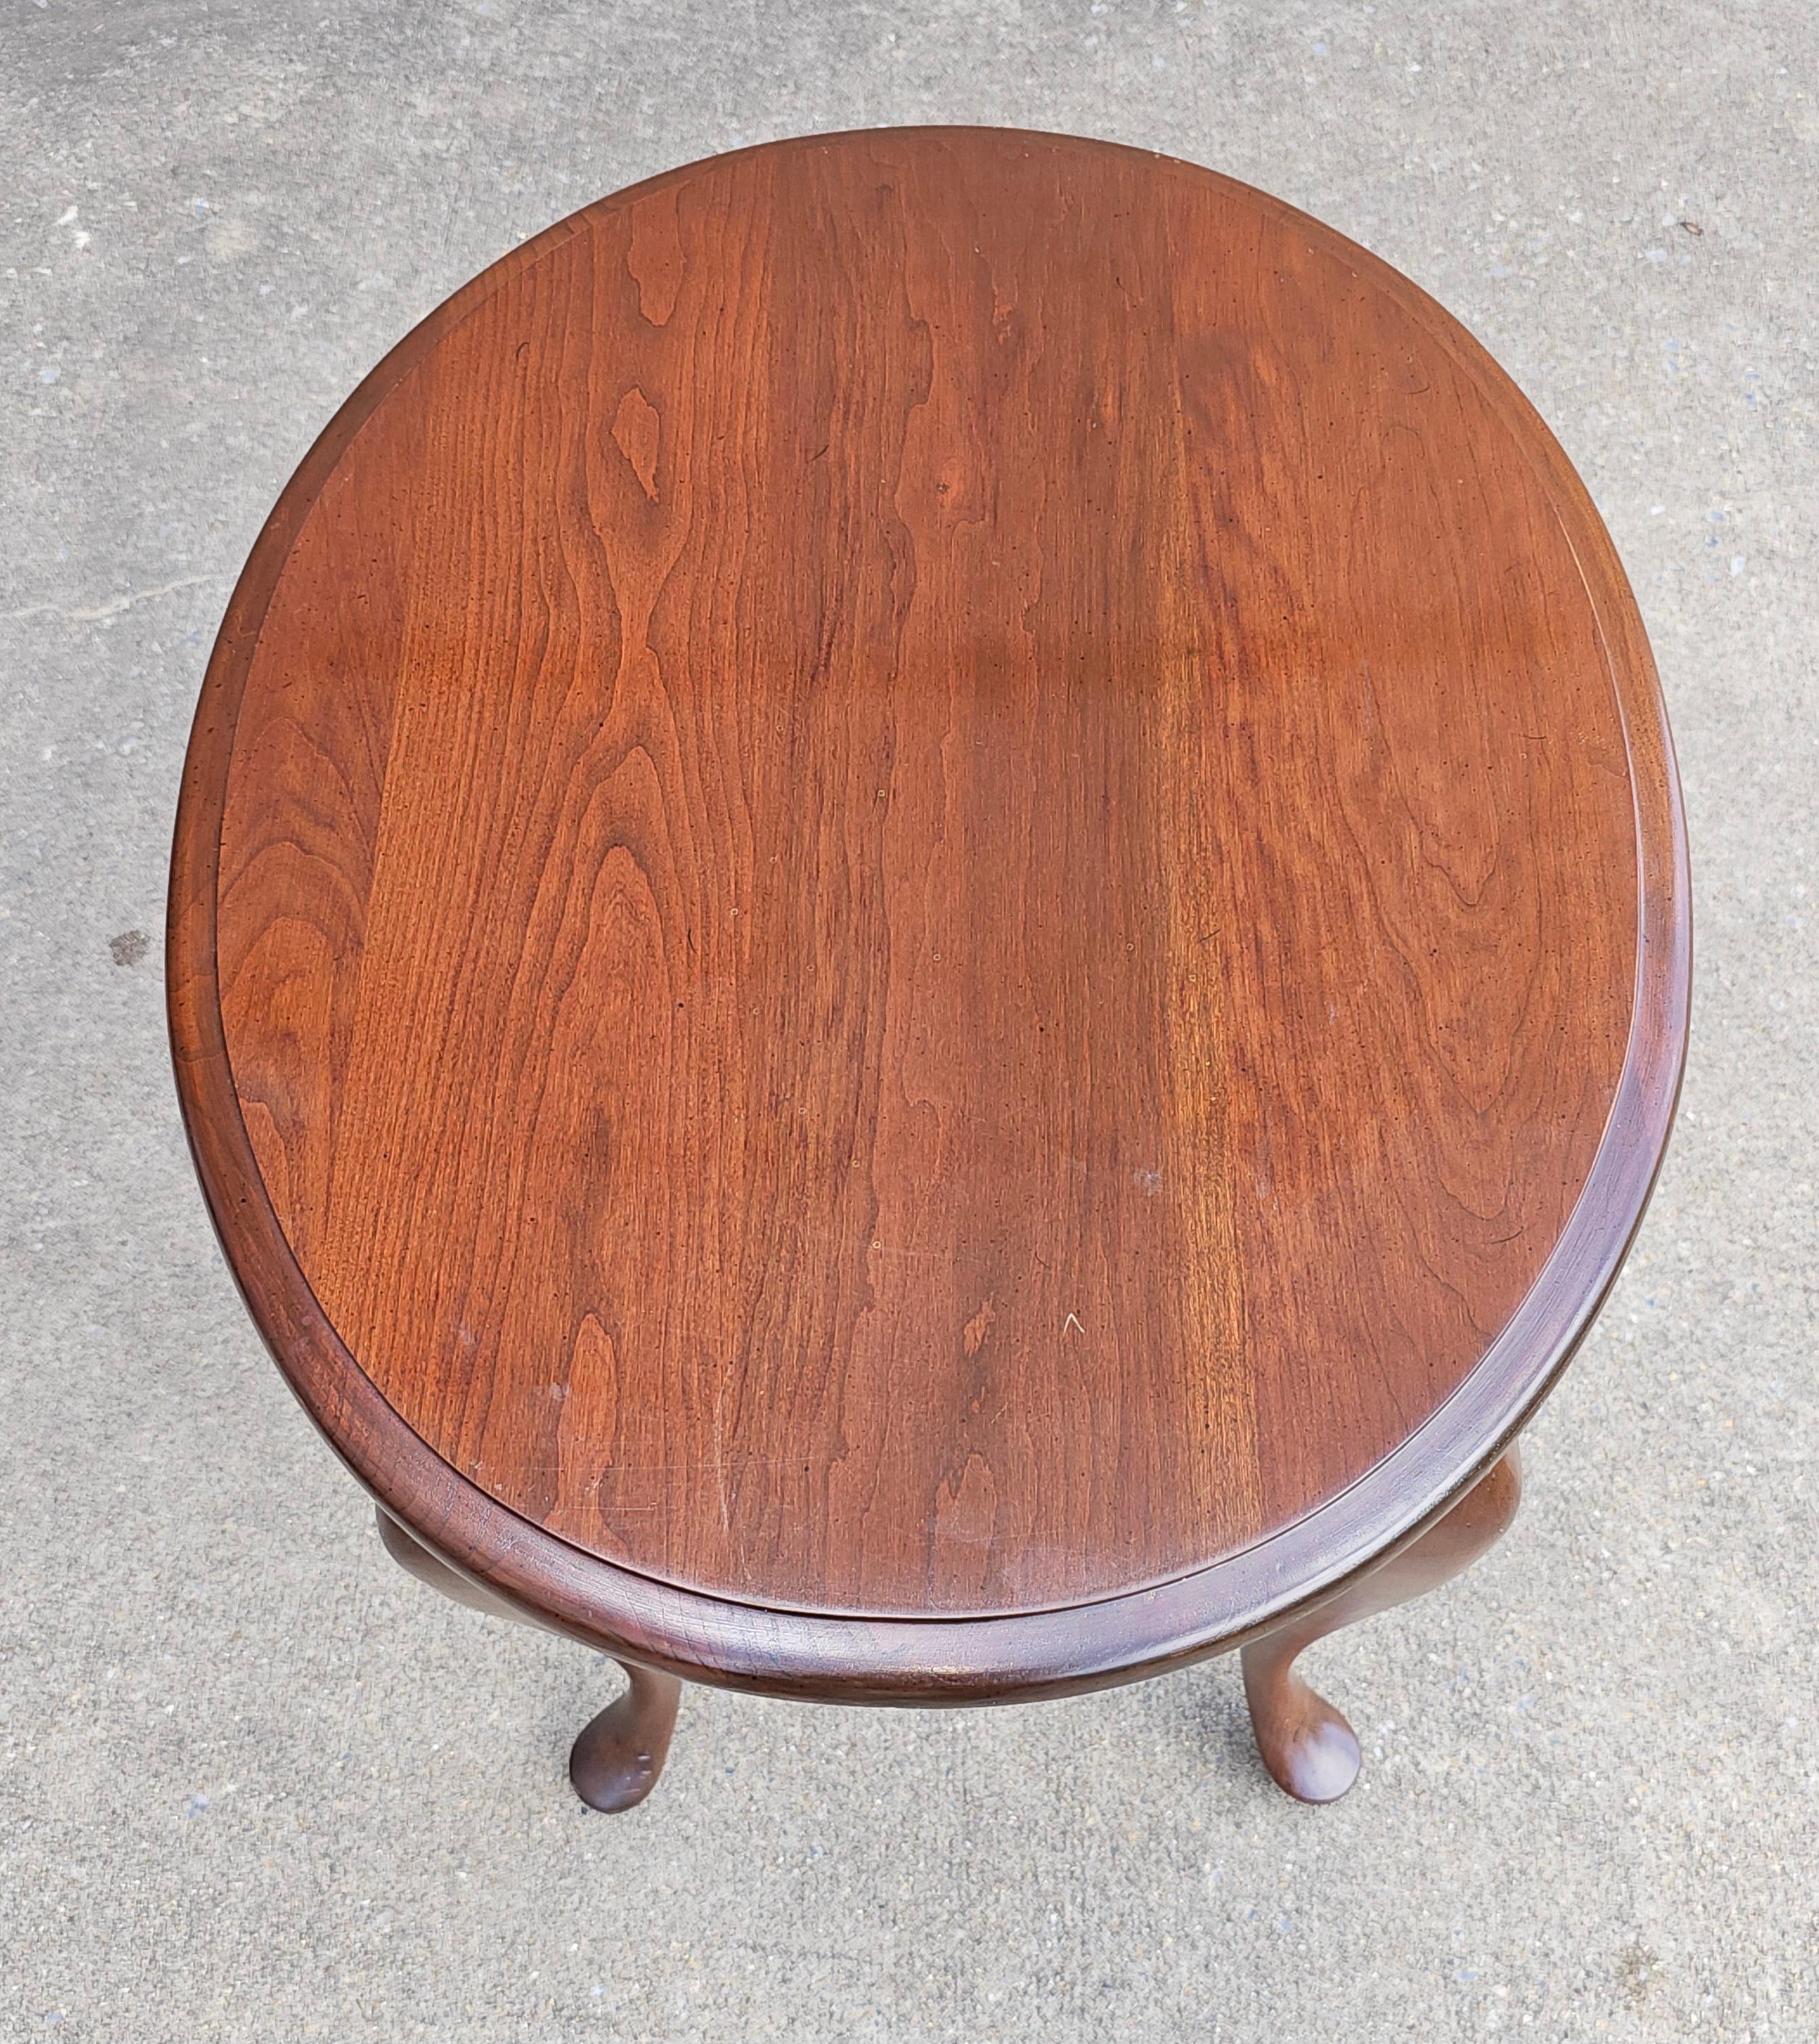 20th Century Queen Anne Style Cherry Oval Side Table. Great vintage condition. Measures 20